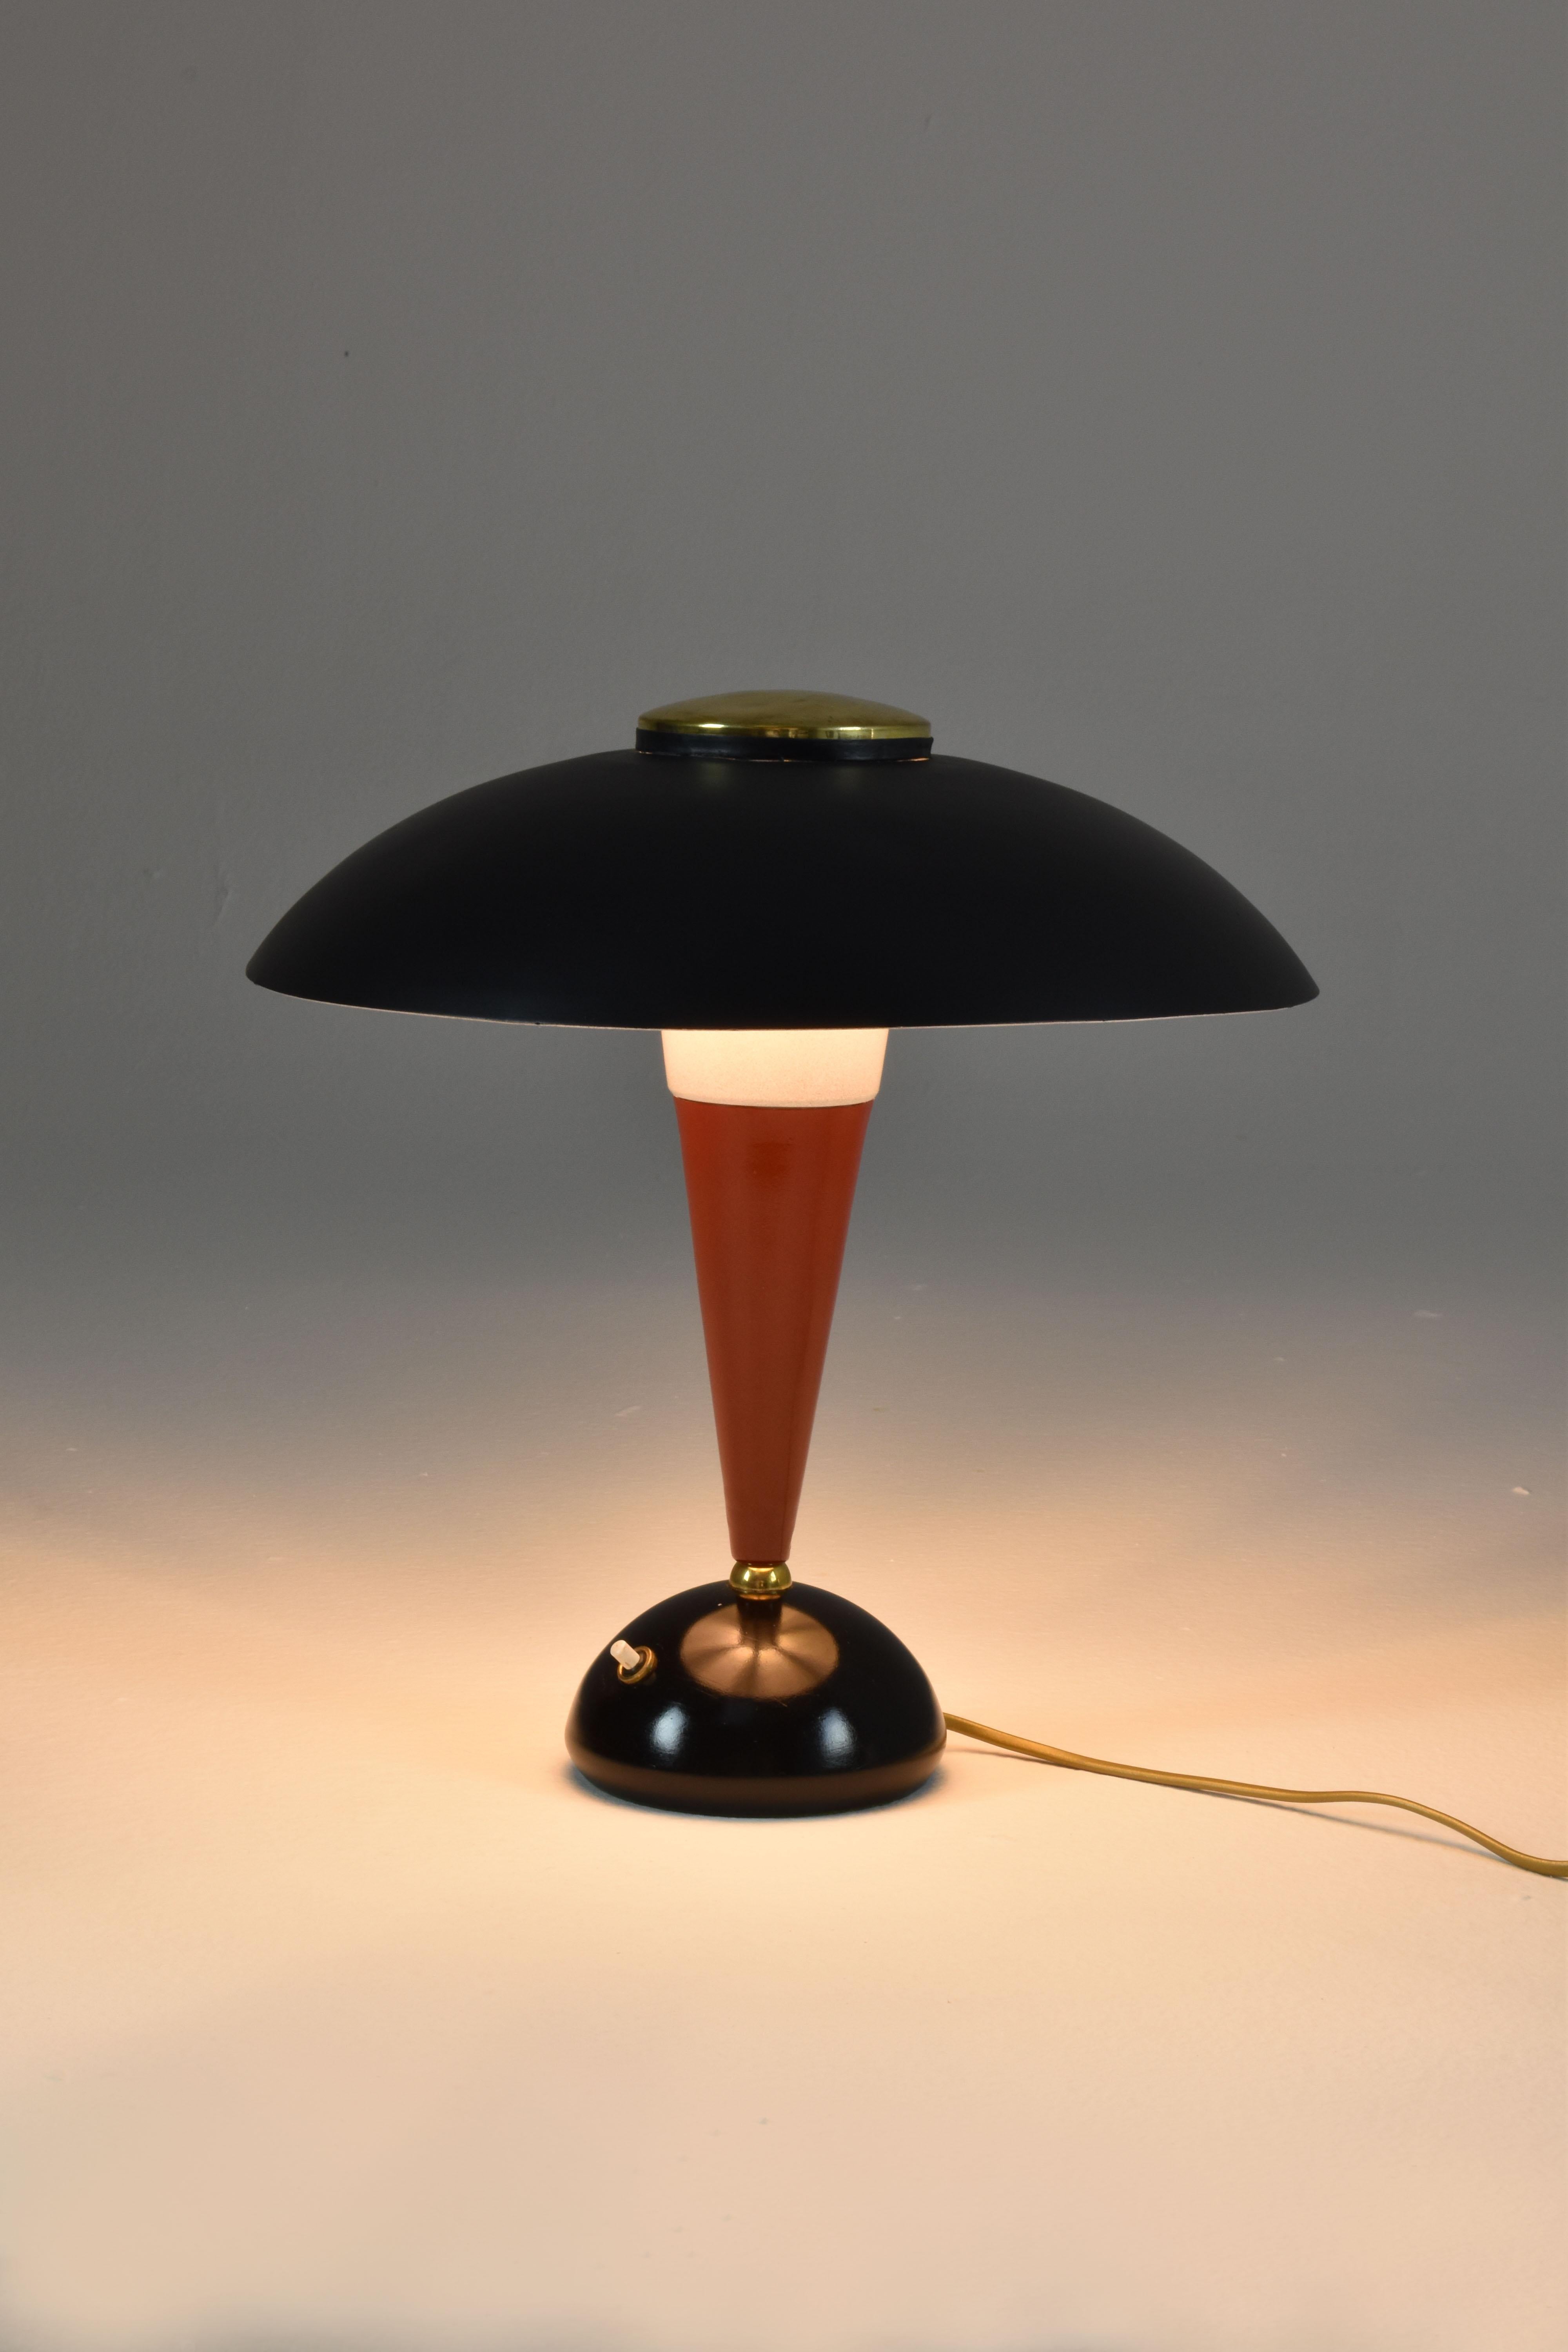 A funky  Italian 1960s table lamp designed with a black shade and base and a dark red stem. This accent light is composed of aluminium and pretty gold brass accents. 

Professionally re-wired with the highest standards and universally compatible.